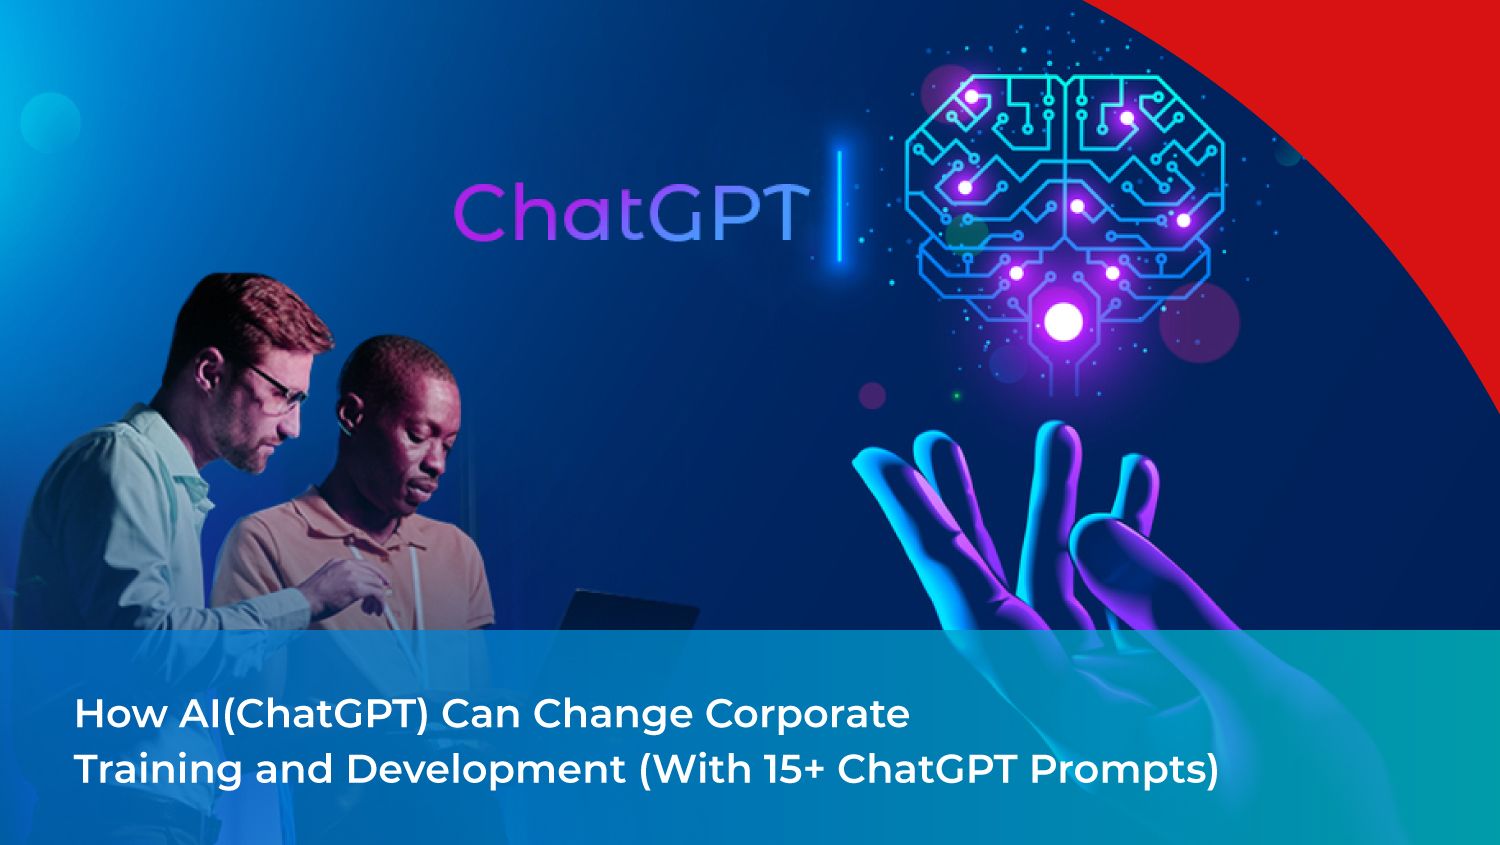 How AI(ChatGPT) Can Change Corporate Training and Development (With 15+ ChatGPT Prompts)